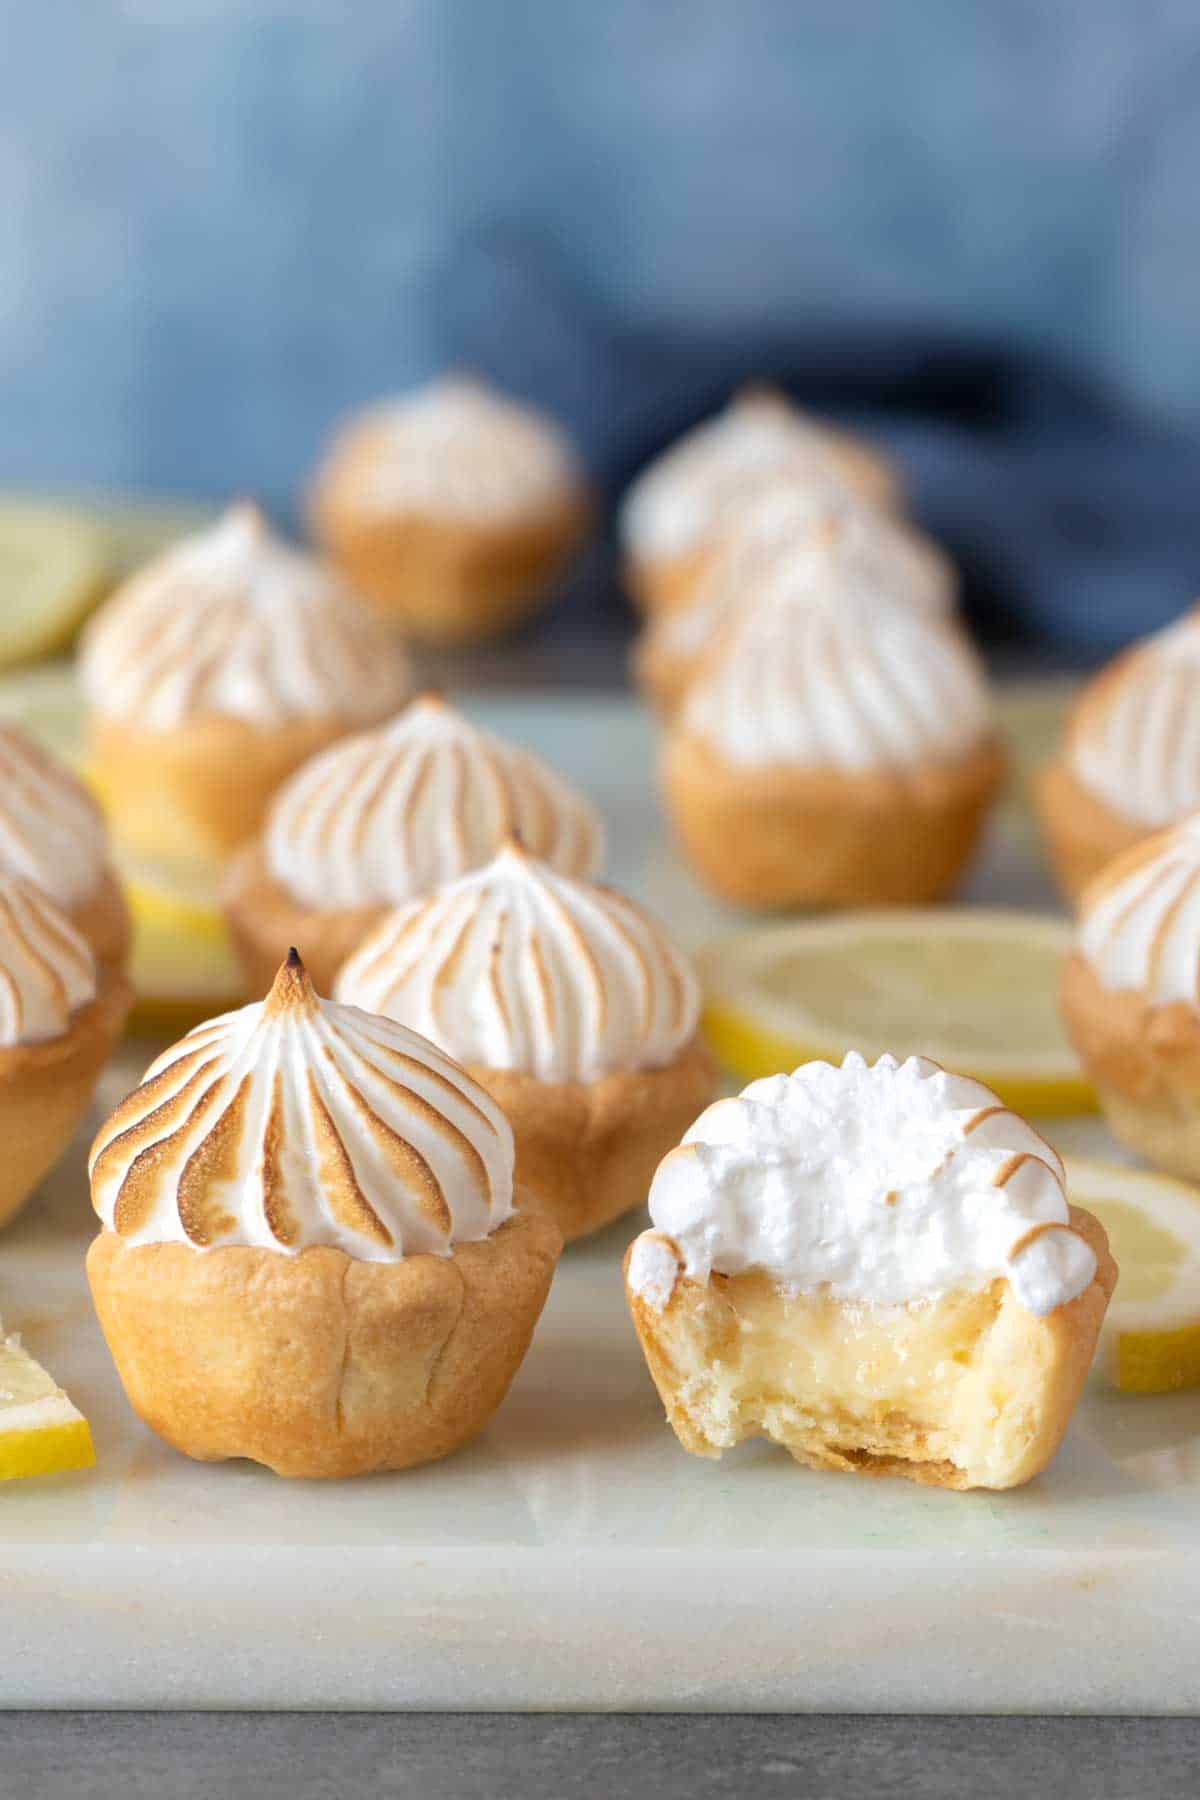 several lemon meringue pie bites on a table together with one half eaten